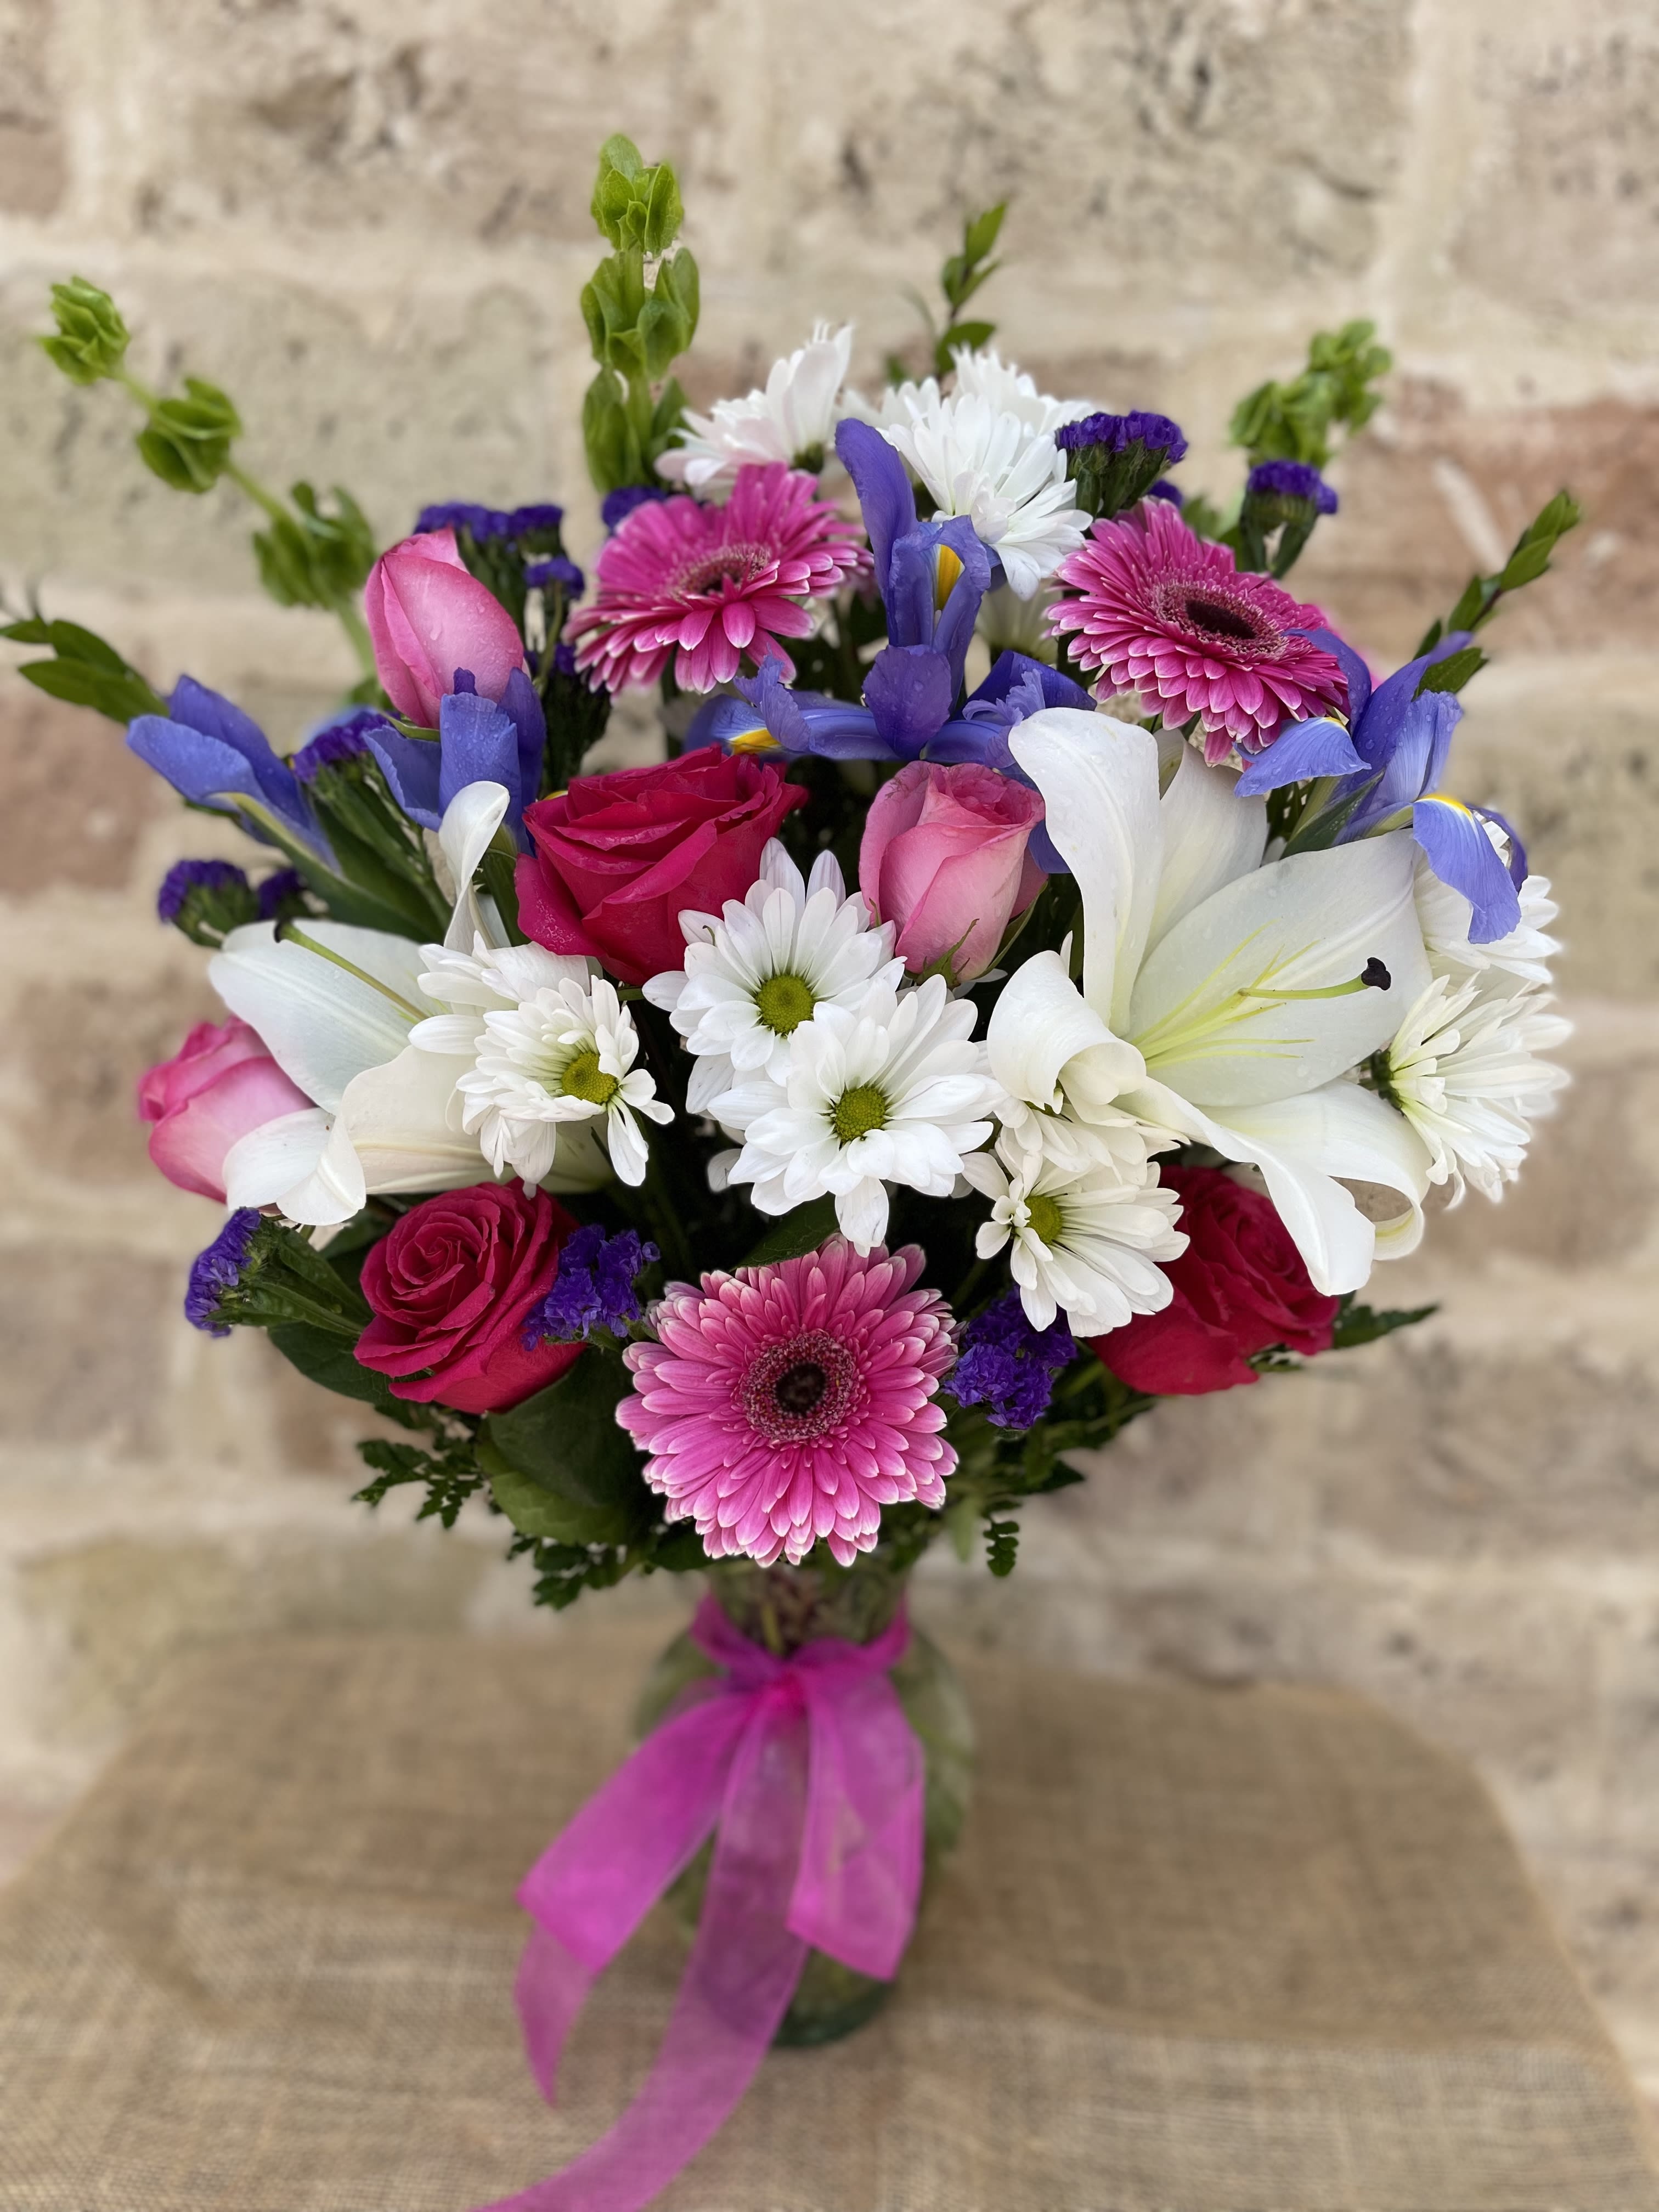 Dearest Treasure  - Our dearest treasures are the ones we hold closest to our hearts. This is a special arrangement filled with lovely roses, gerberas, lilies and more.  